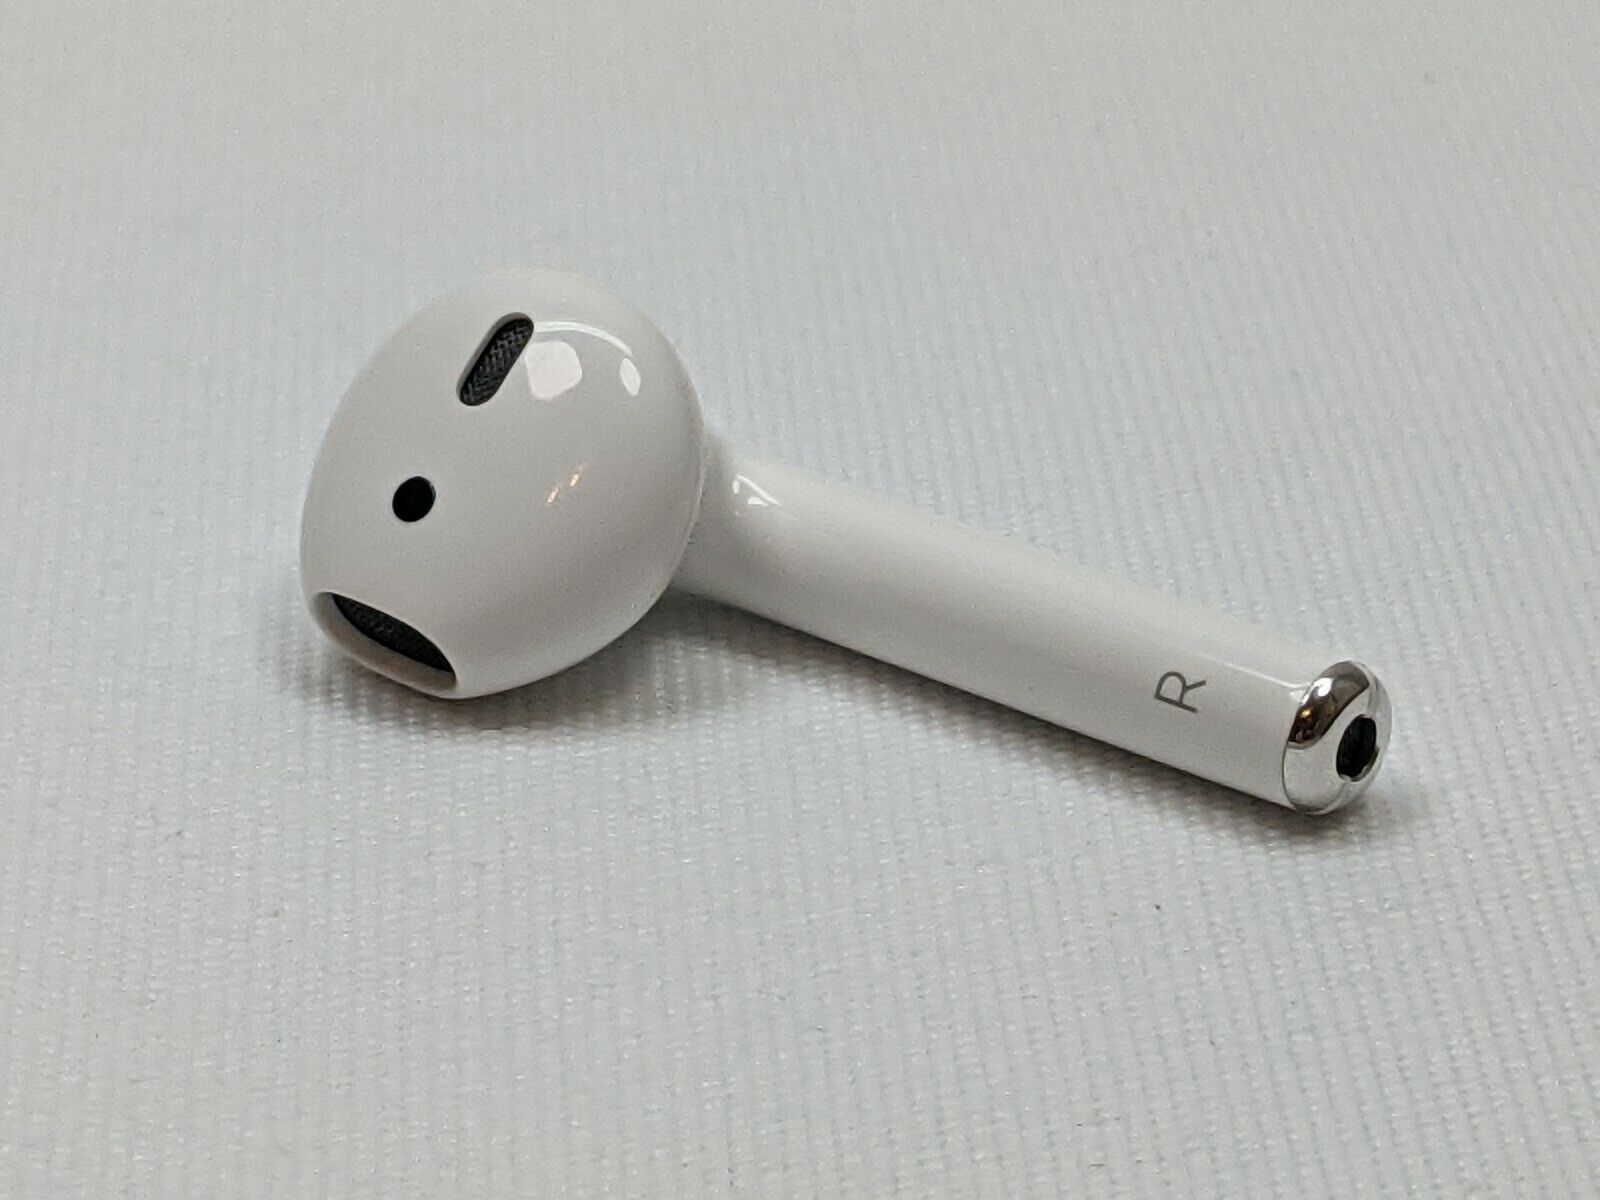 Apple AirPod 2nd Gen Right AirPod Only.